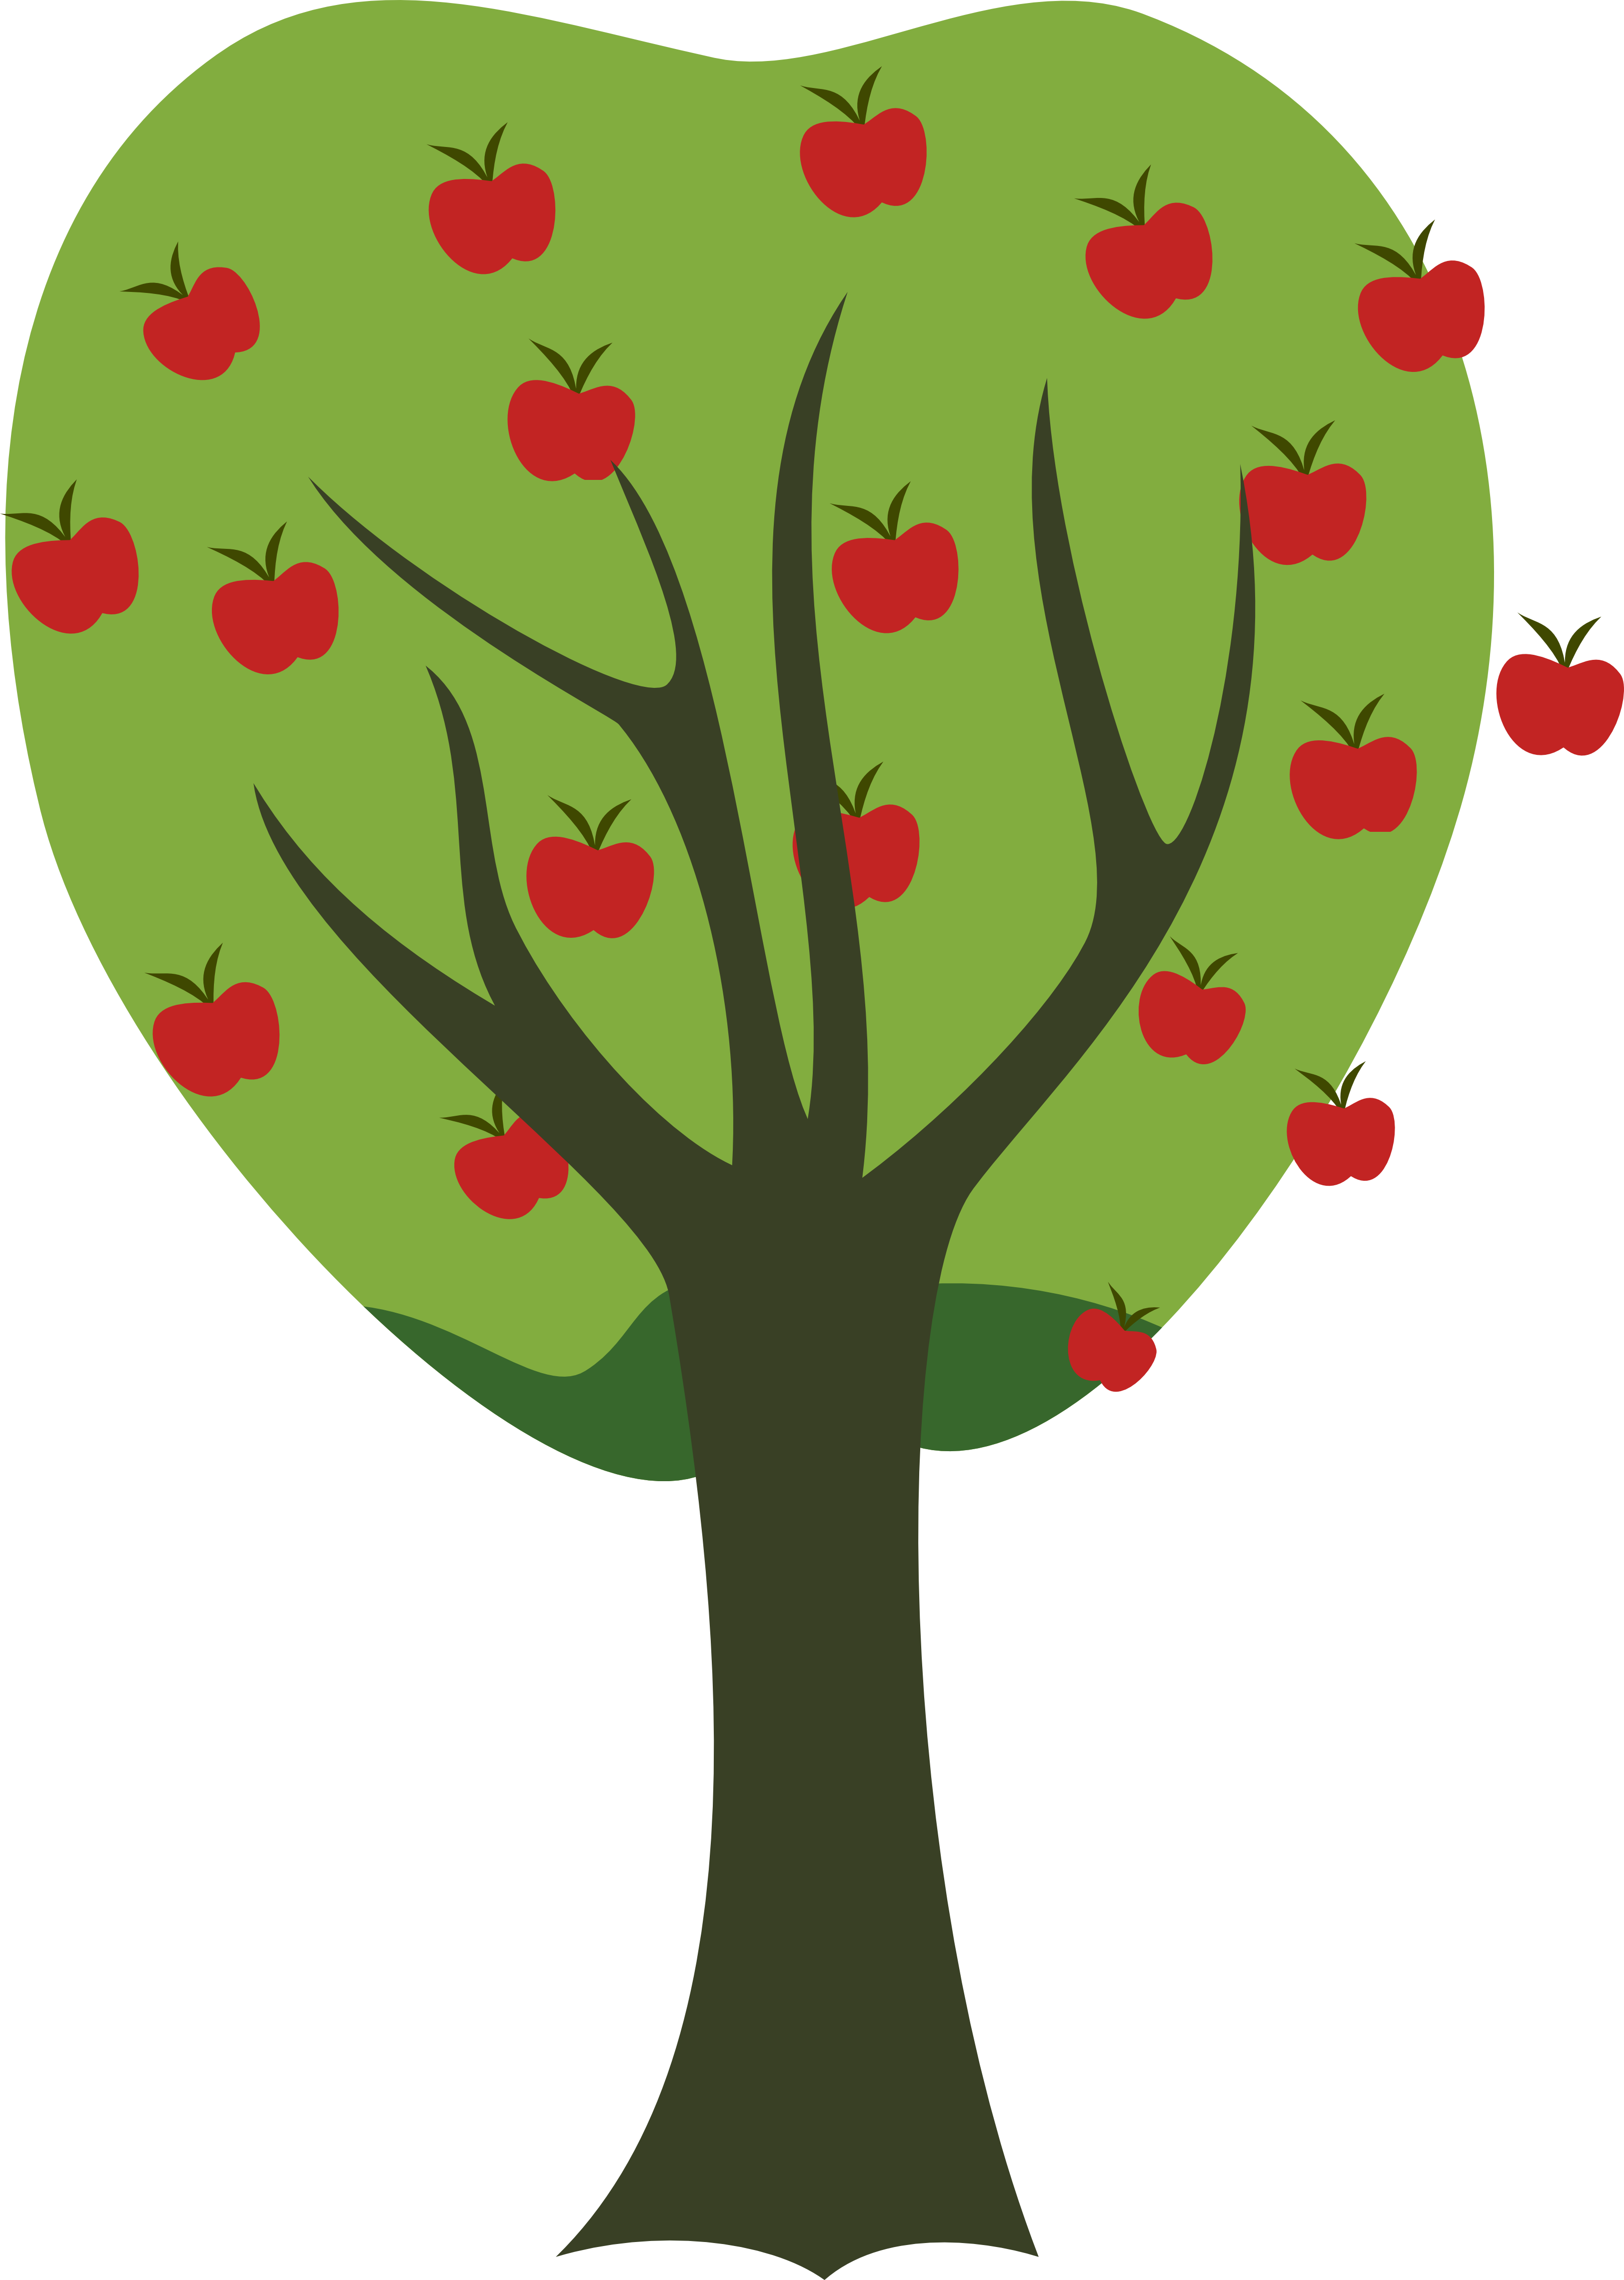 clipart of an apple tree - photo #40